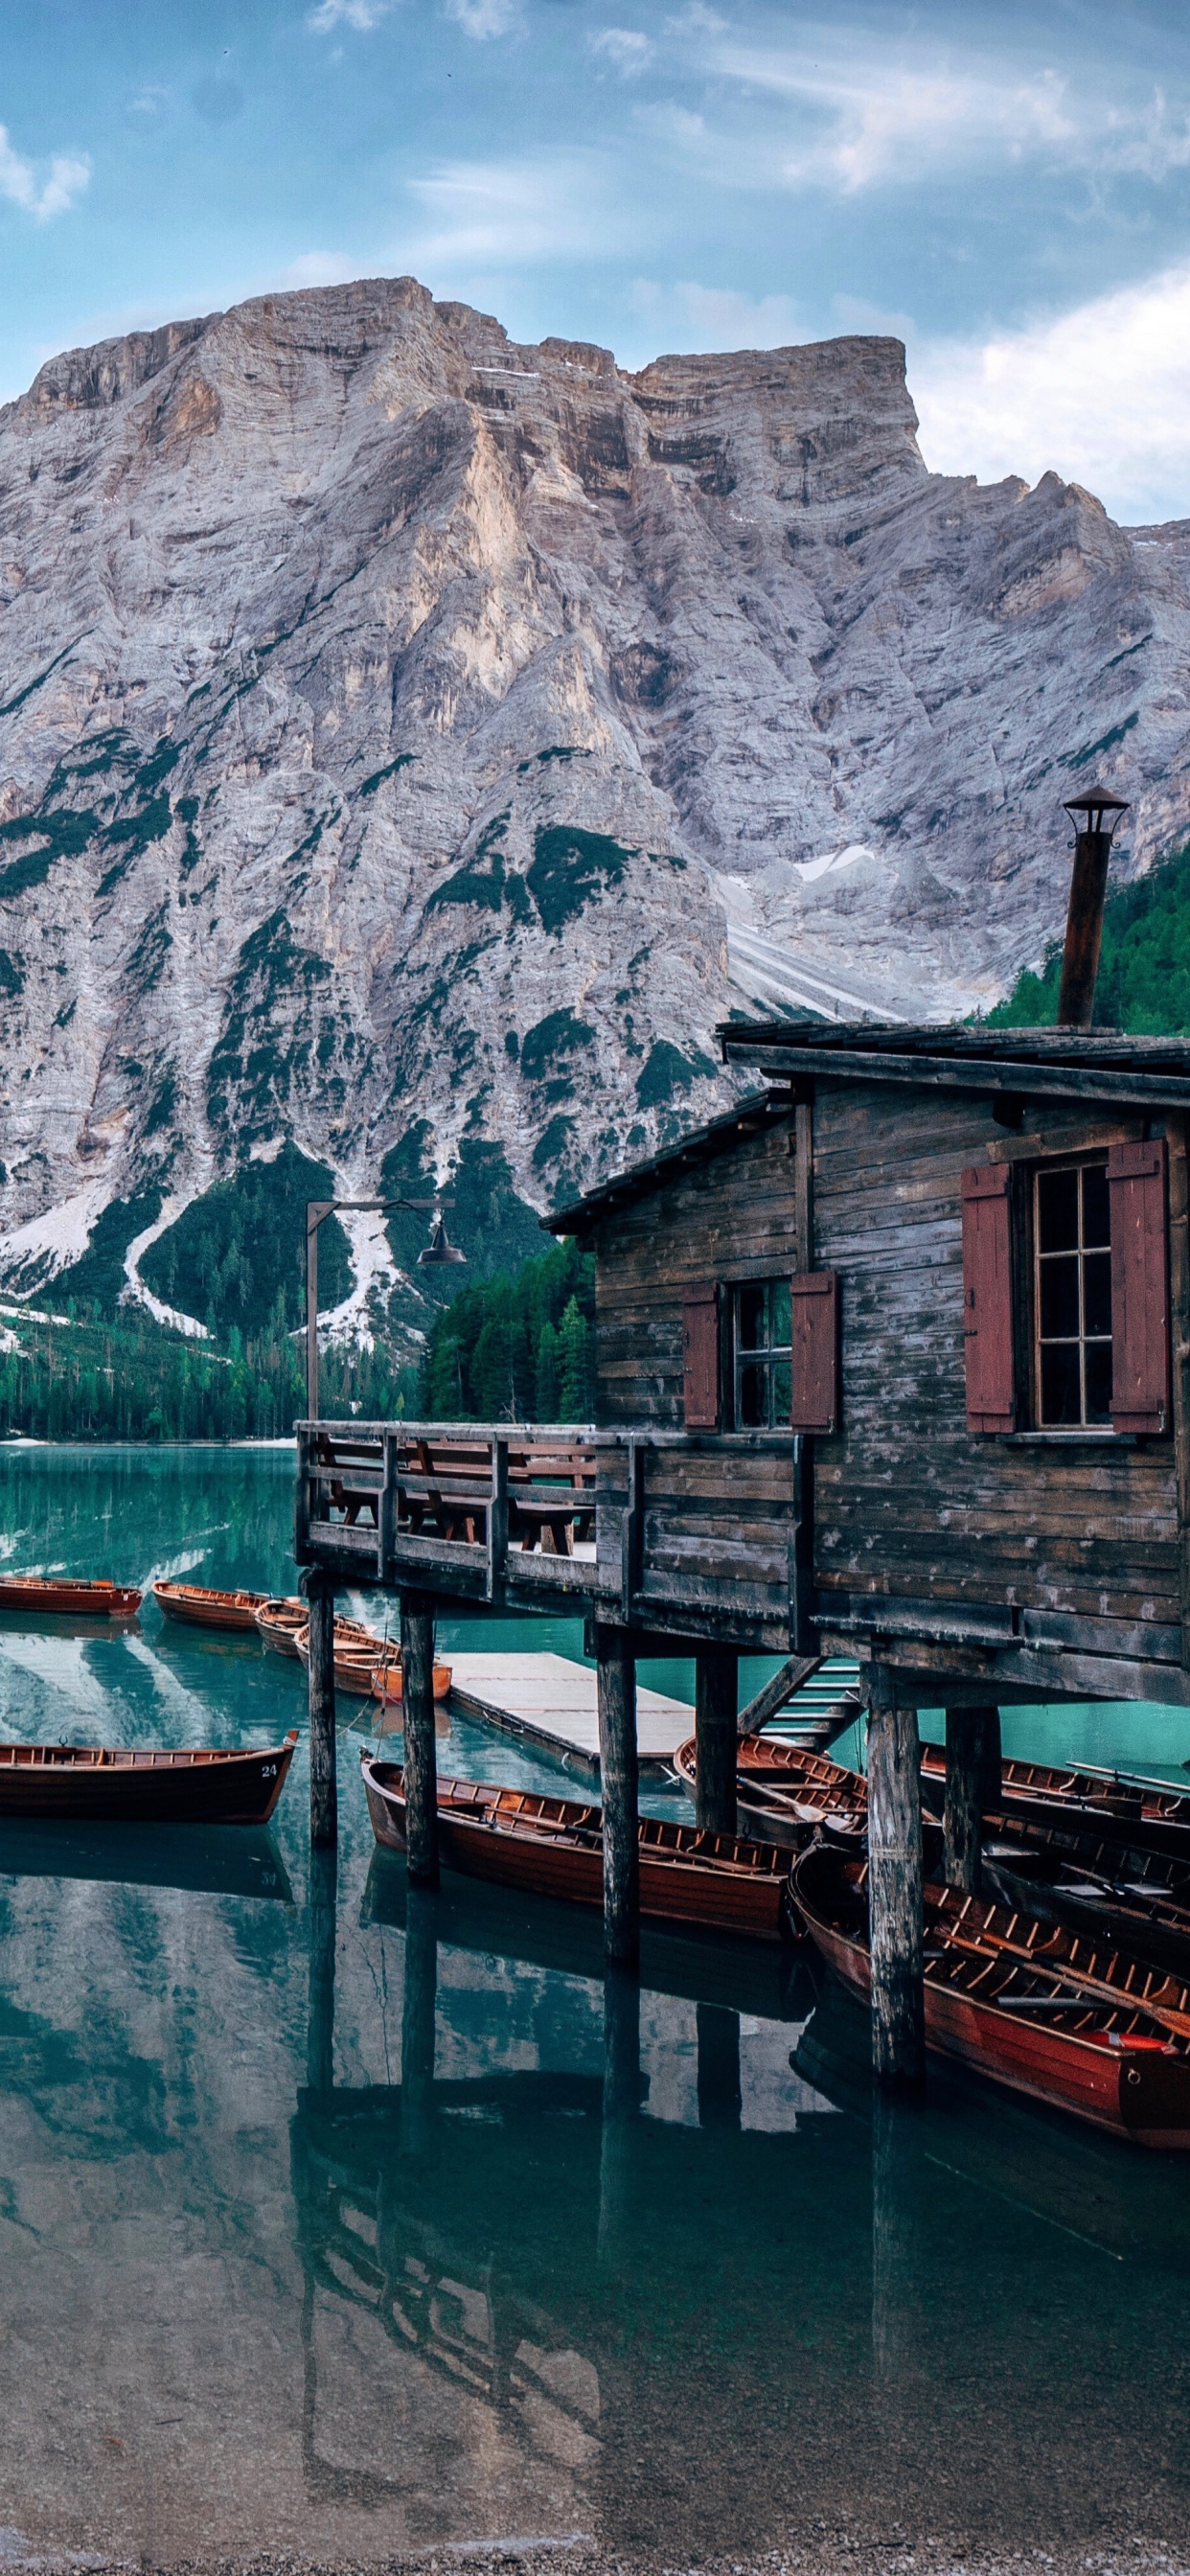 Lake Braies Wallpaper 4K, Italy, Wooden House, Boats, Mountains, Glacier, Nature